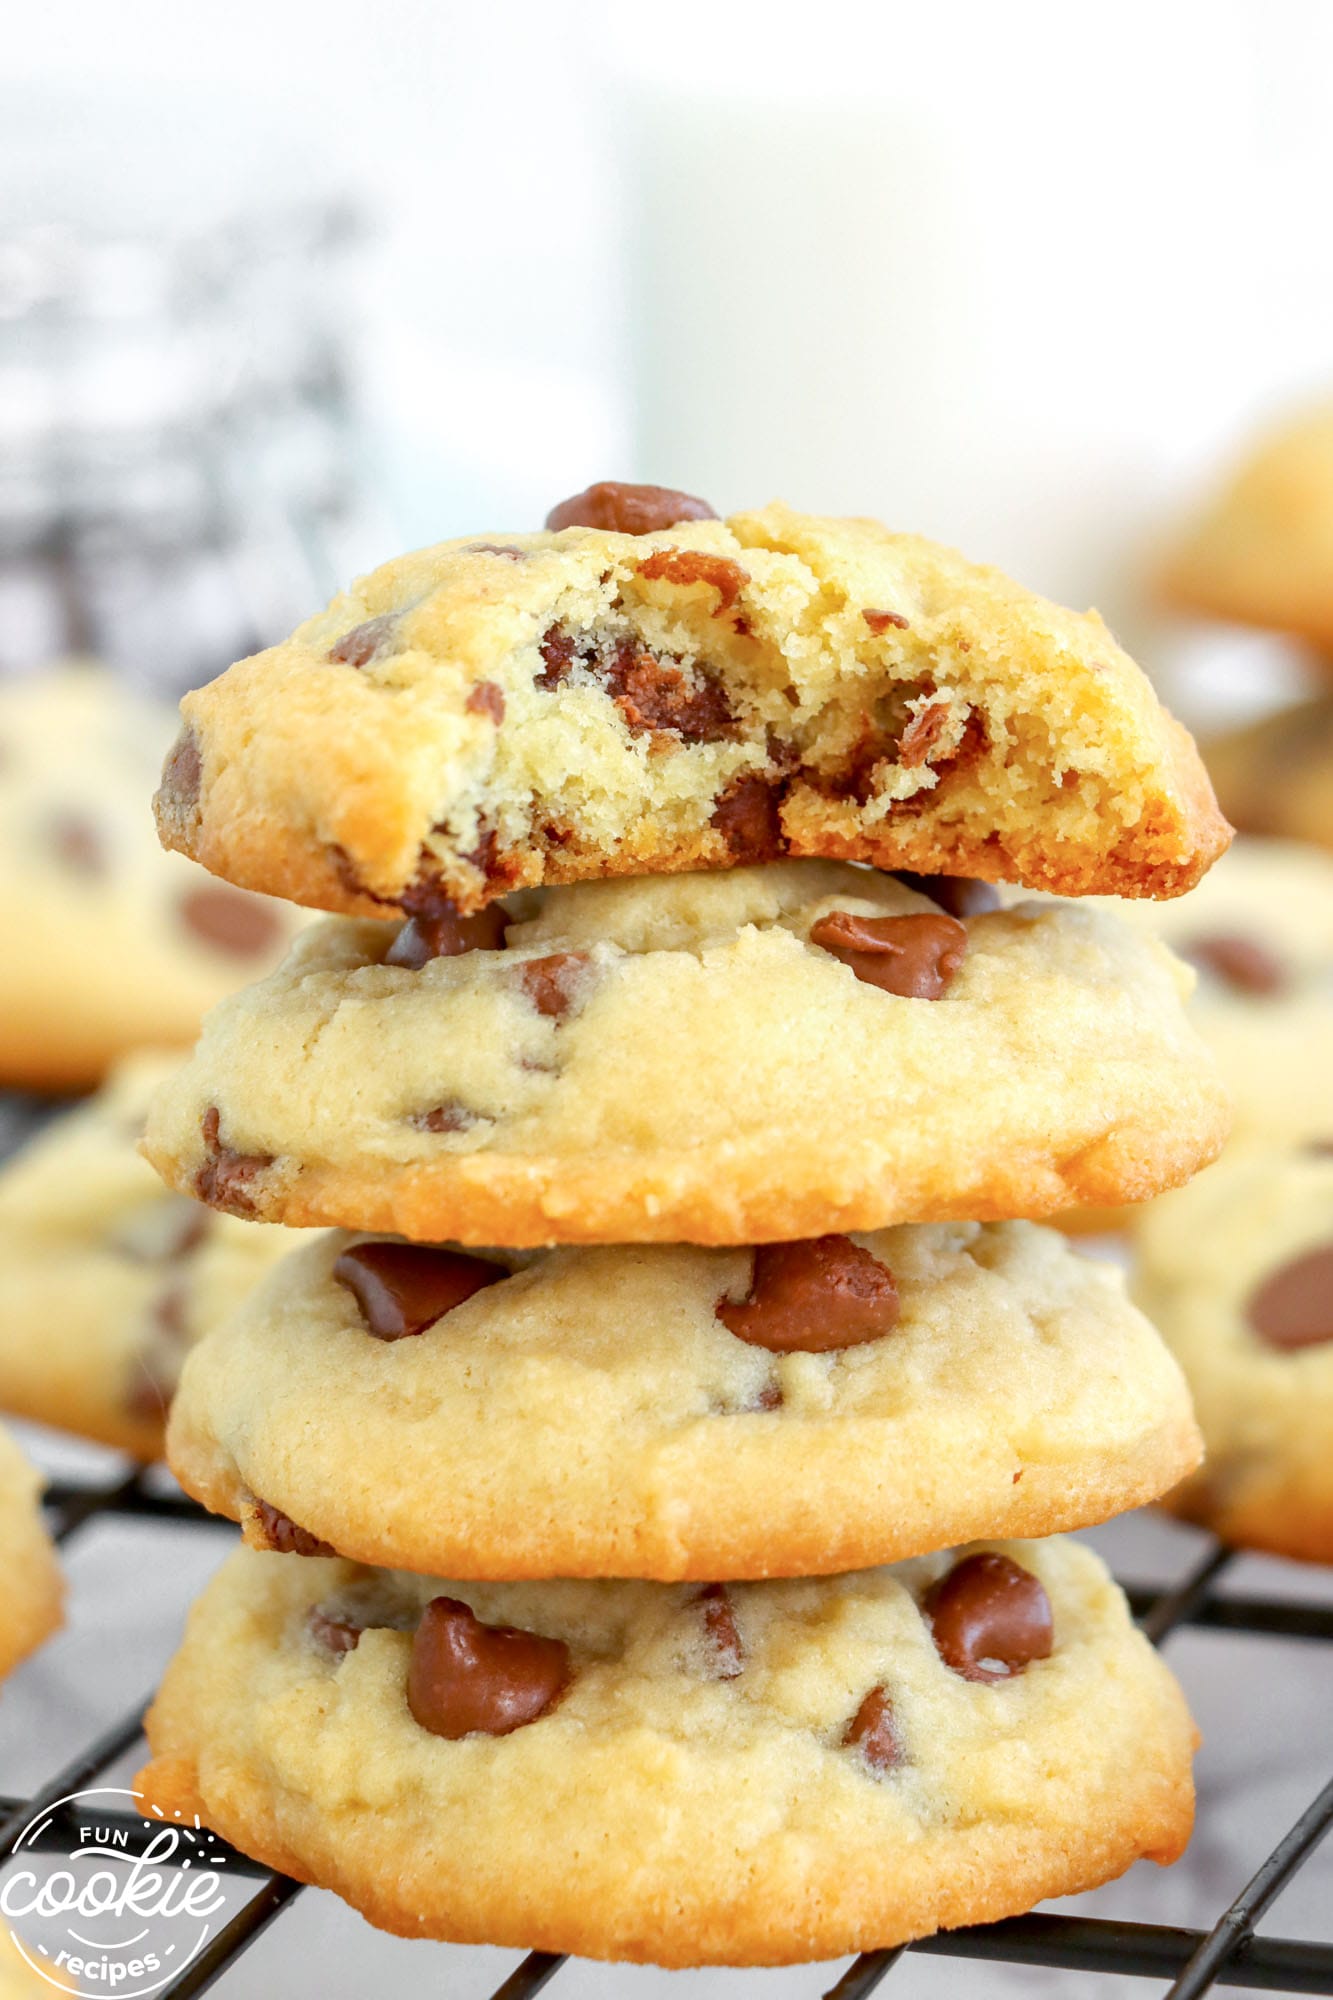 a stack of four chocolate chip cookies with a bite taken from the top one.